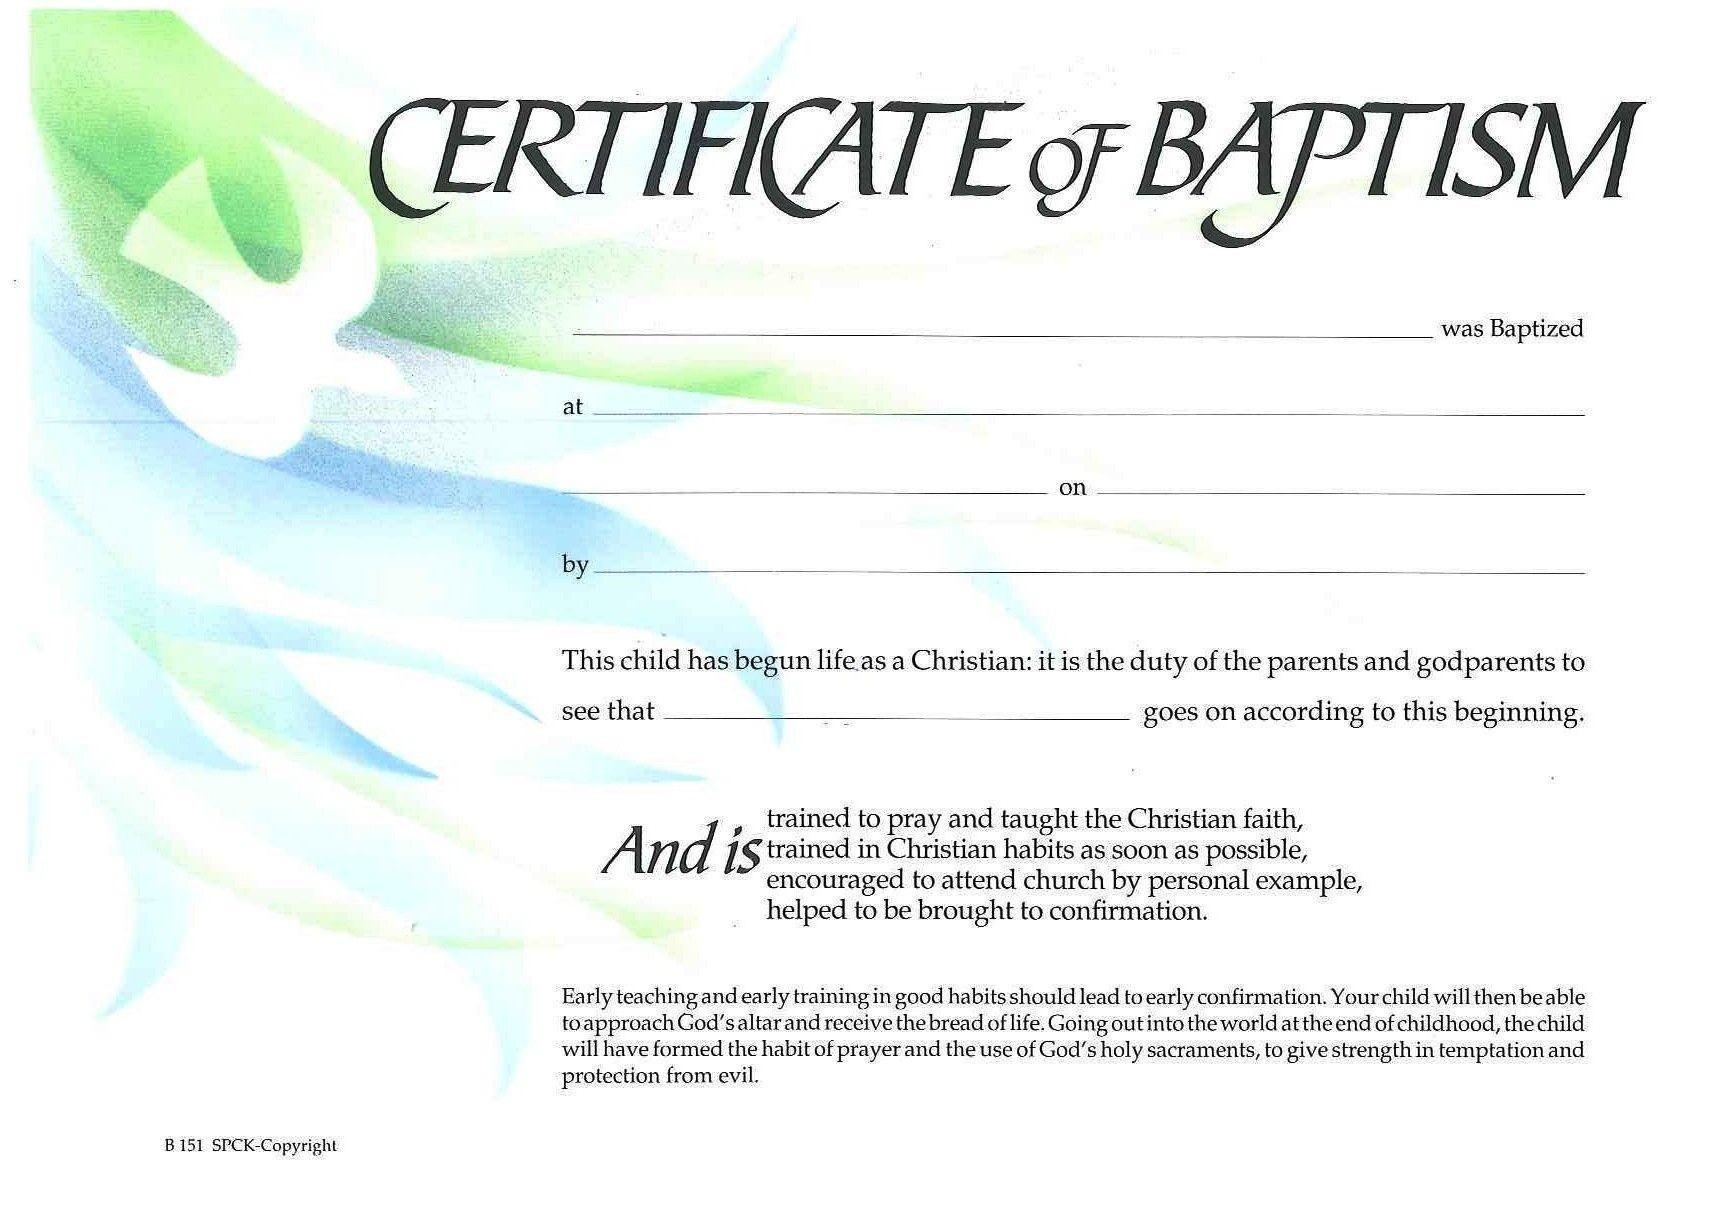 ❤️Free Sample Certificate Of Baptism form Template❤️ With Christian Baptism Certificate Template